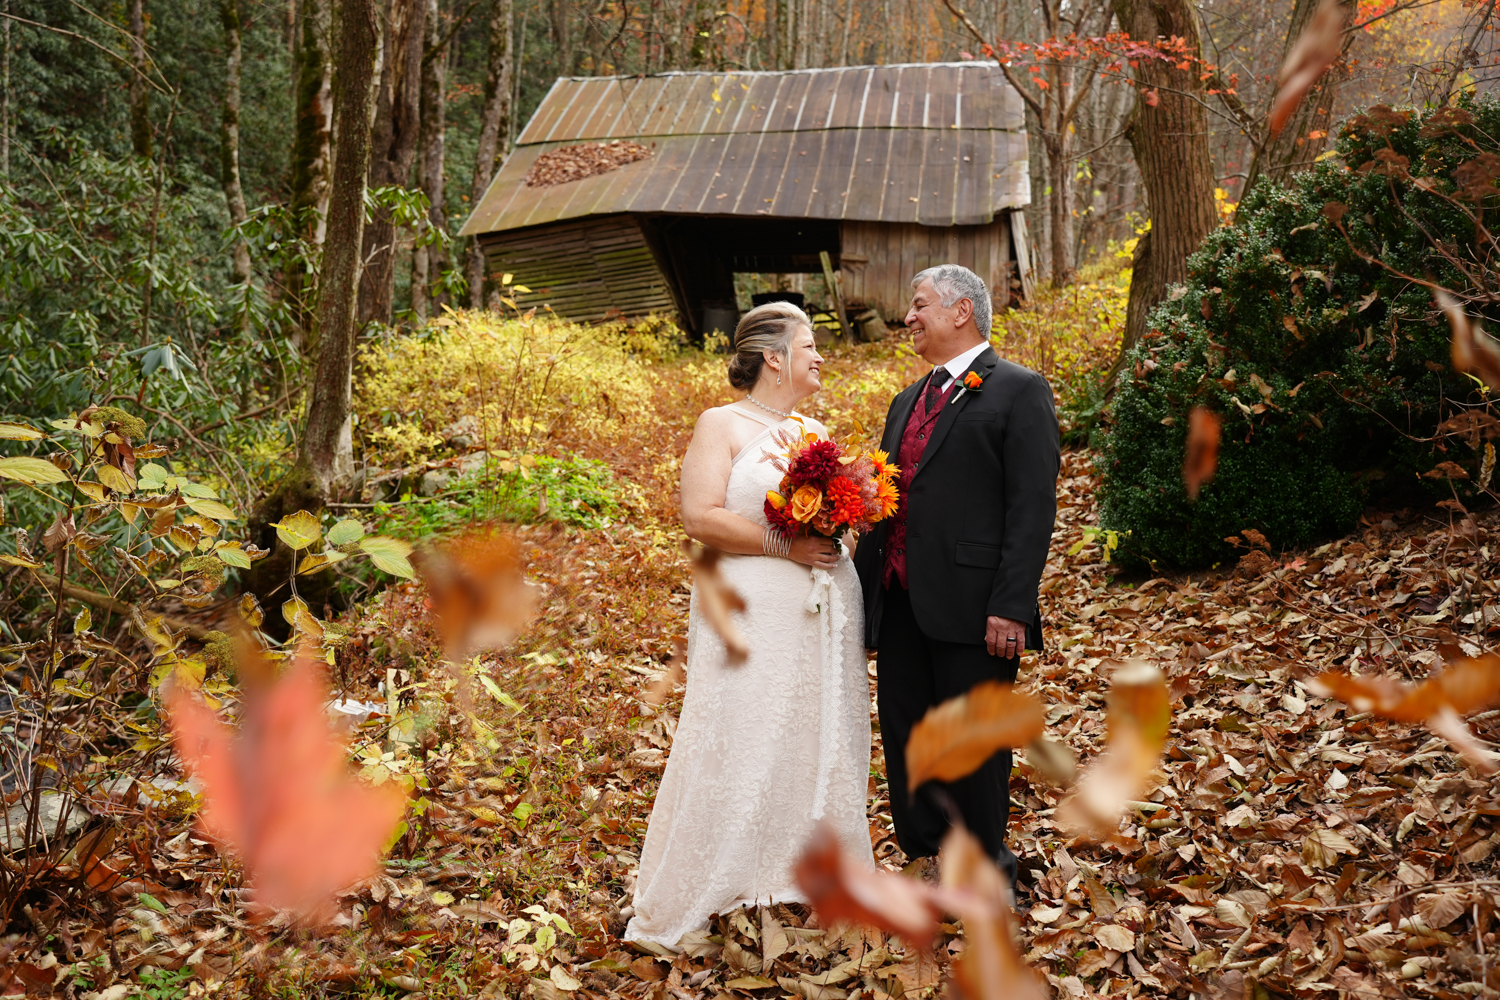 wedding couple walking with leaves falling in autumn and an old leaning barn behind them